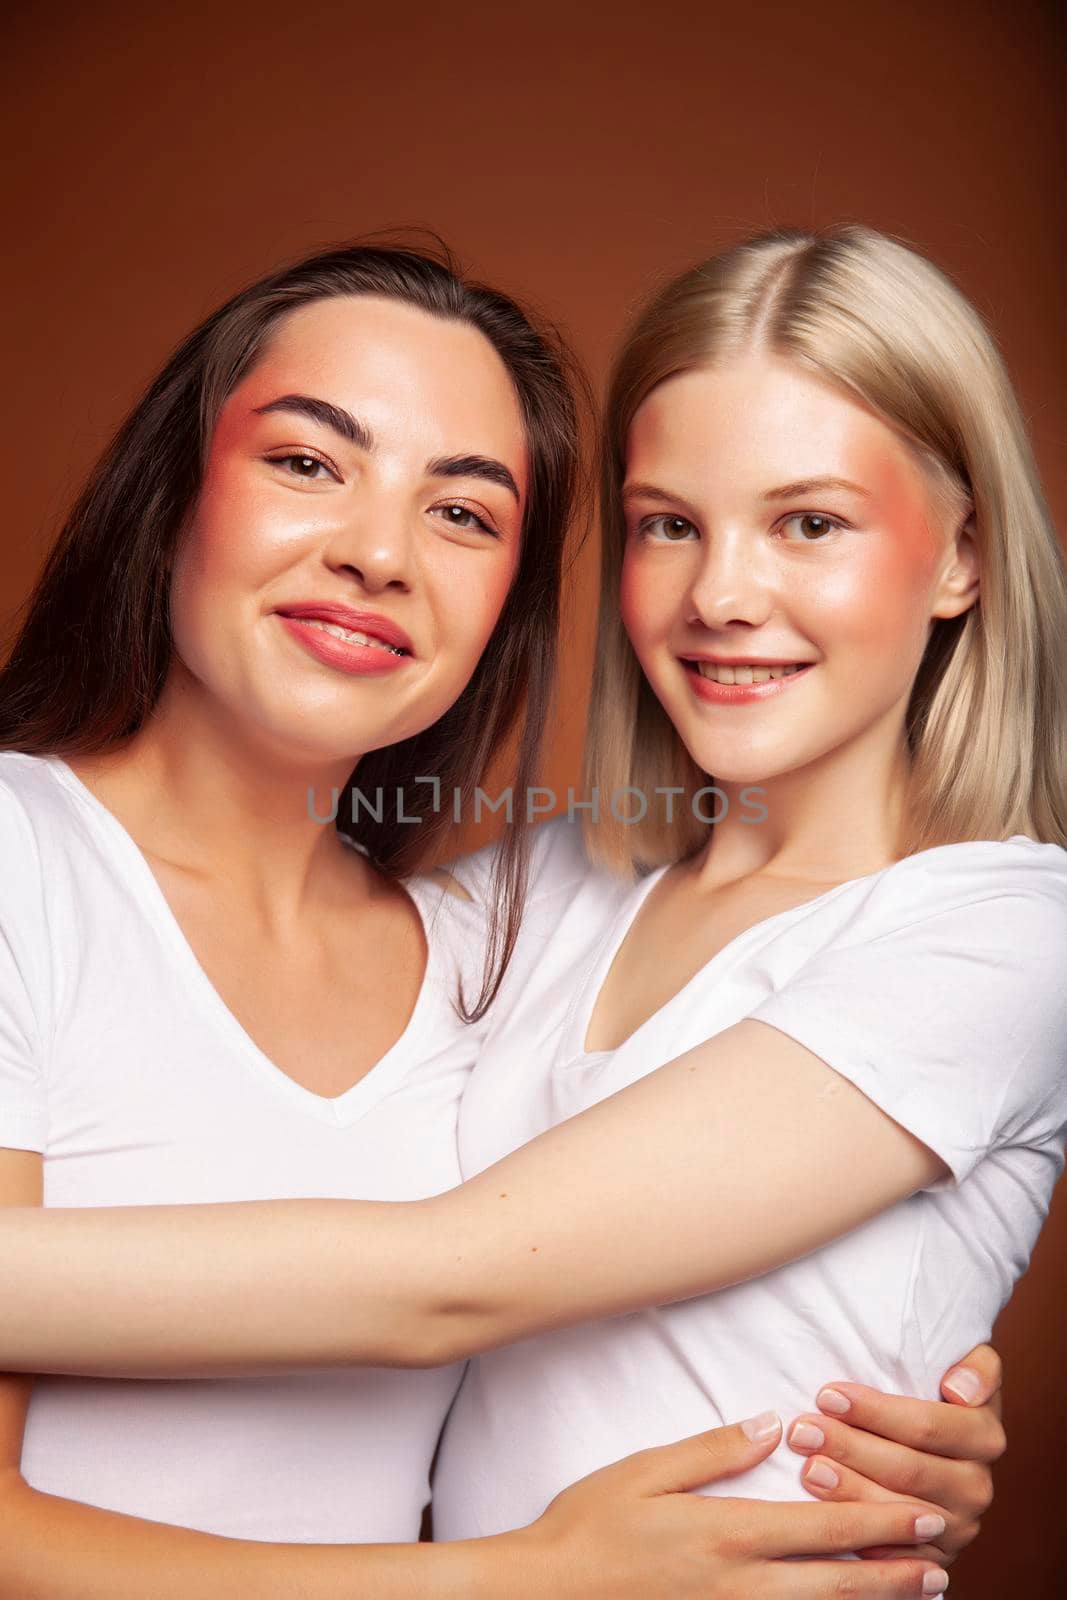 two pretty diverse girls happy posing together: blond and brunette, caucasian and asian on brown background, lifestyle people concept by JordanJ